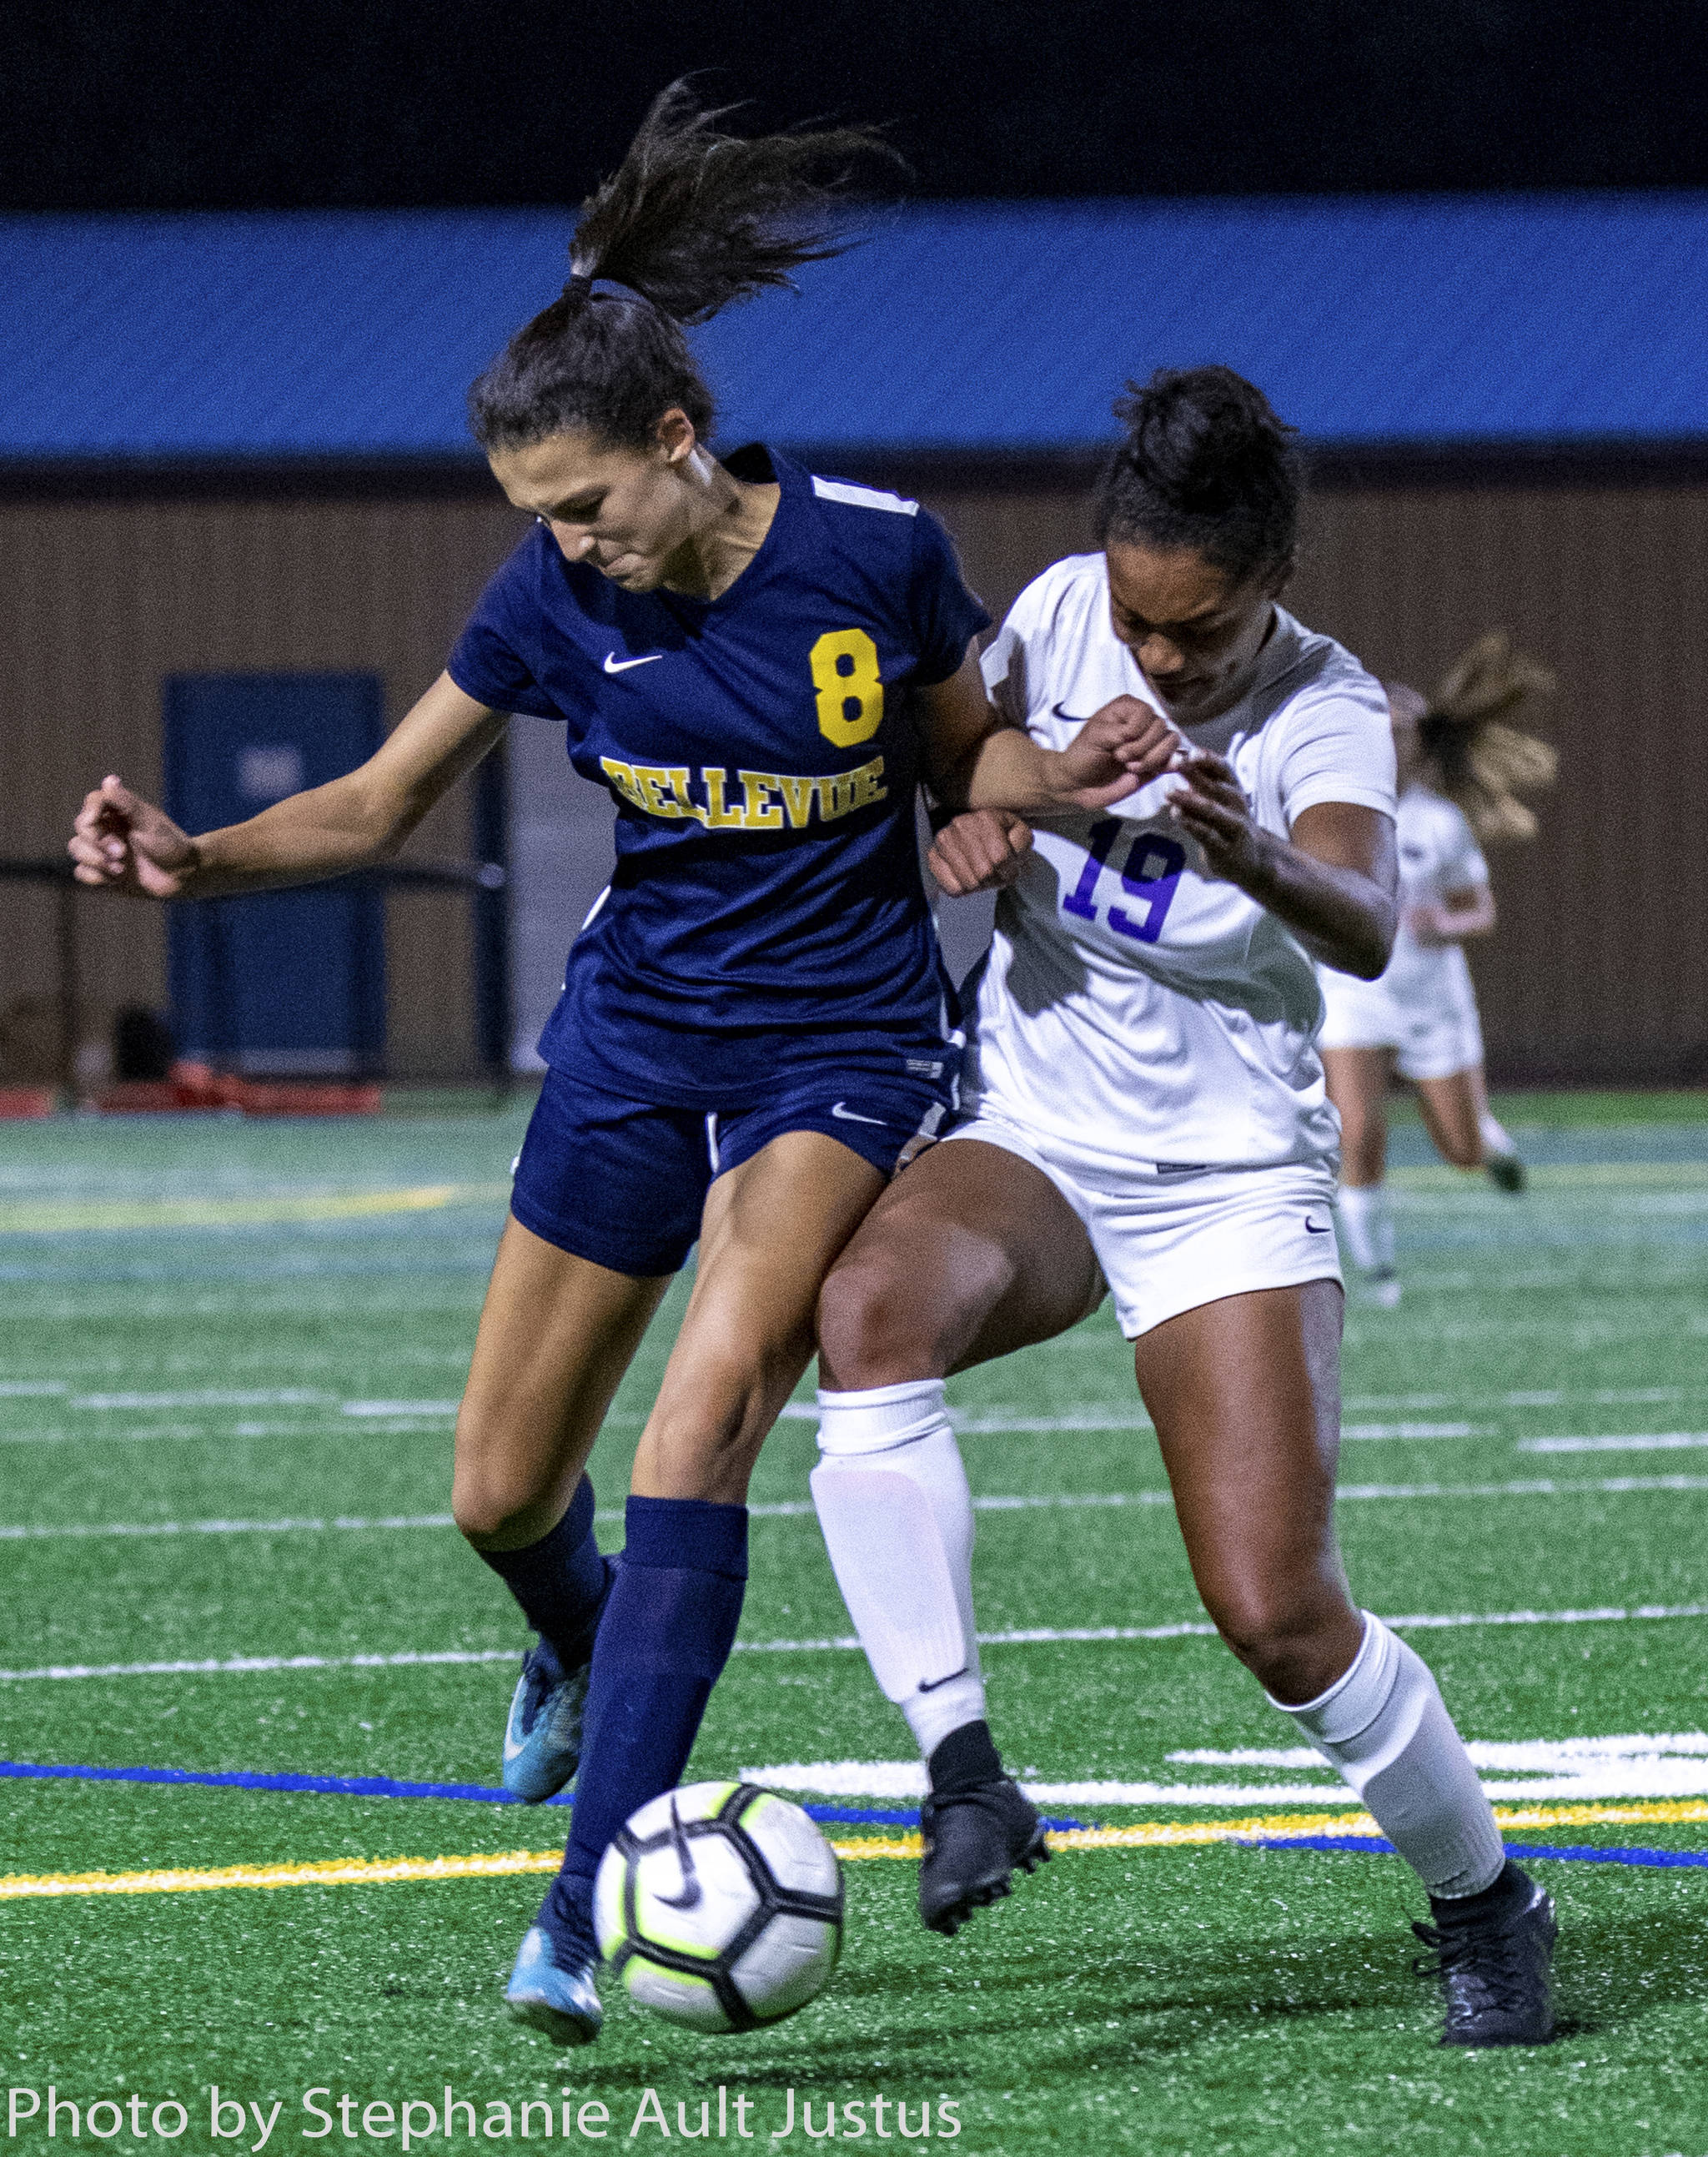 Bellevue forward Rebekah Roth (8) and Lake Washington defender Ari Issa (19) fight for the ball in the Wolverines’ 2-0 loss on Oct. 15. Photo courtesy of Stephanie Ault Justus